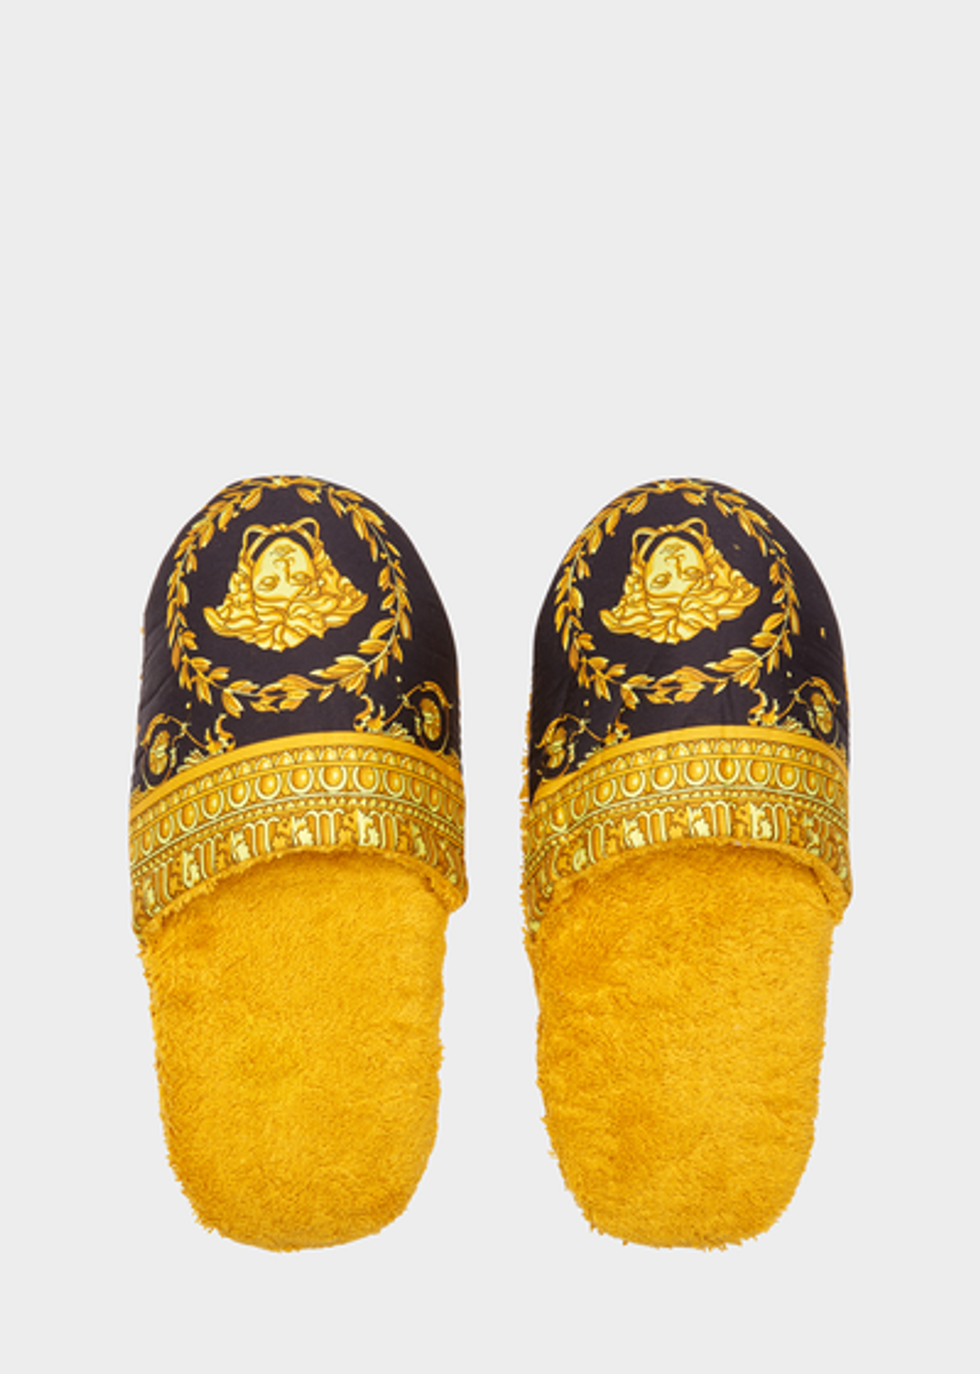 Versace releases a new line of Baroque bath slippers